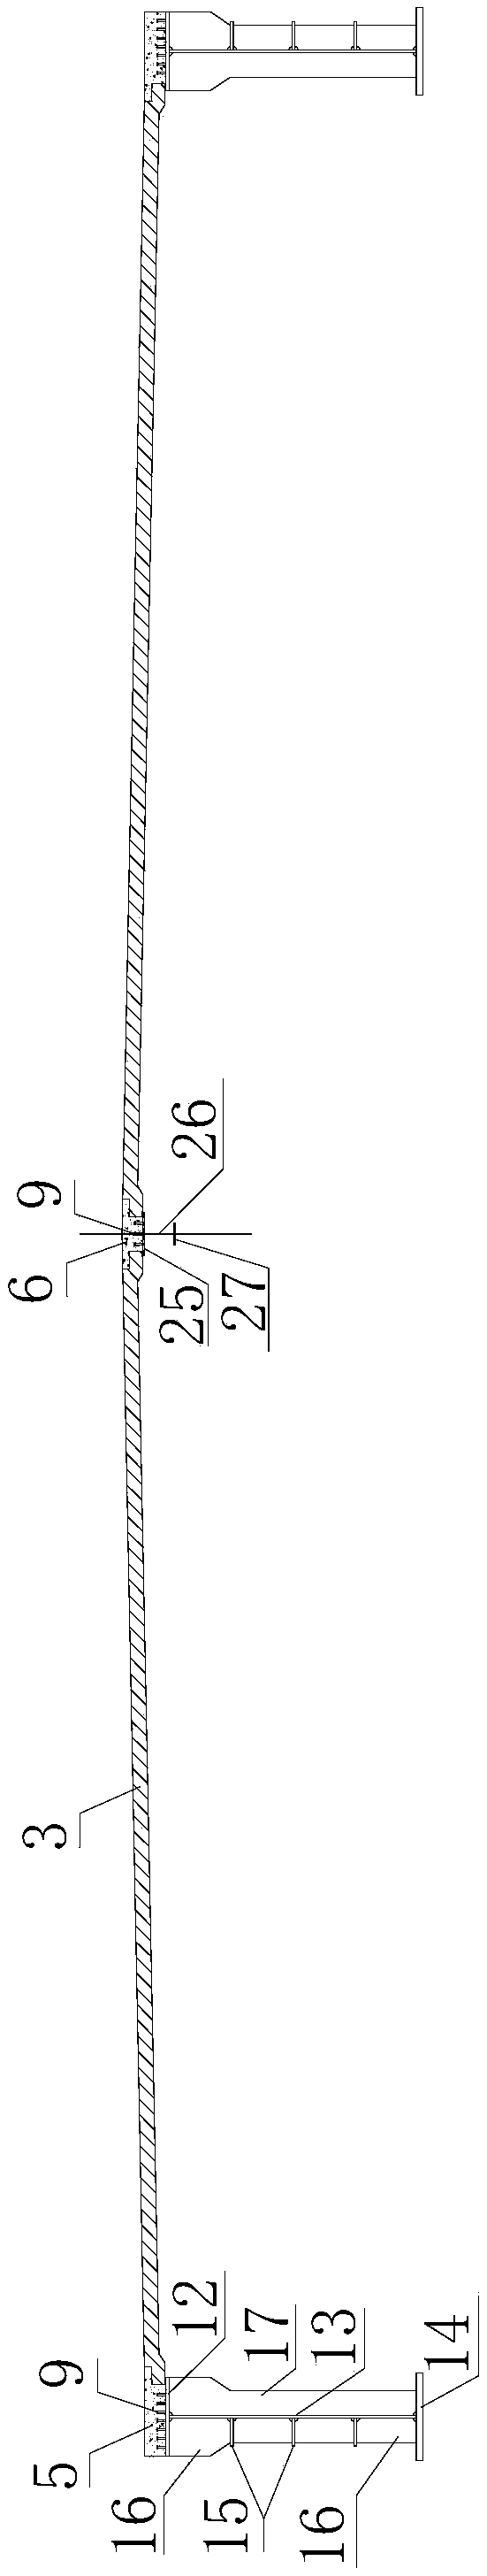 SteeL-UHPC combination beam for cabLe-stayed bridge and construction method